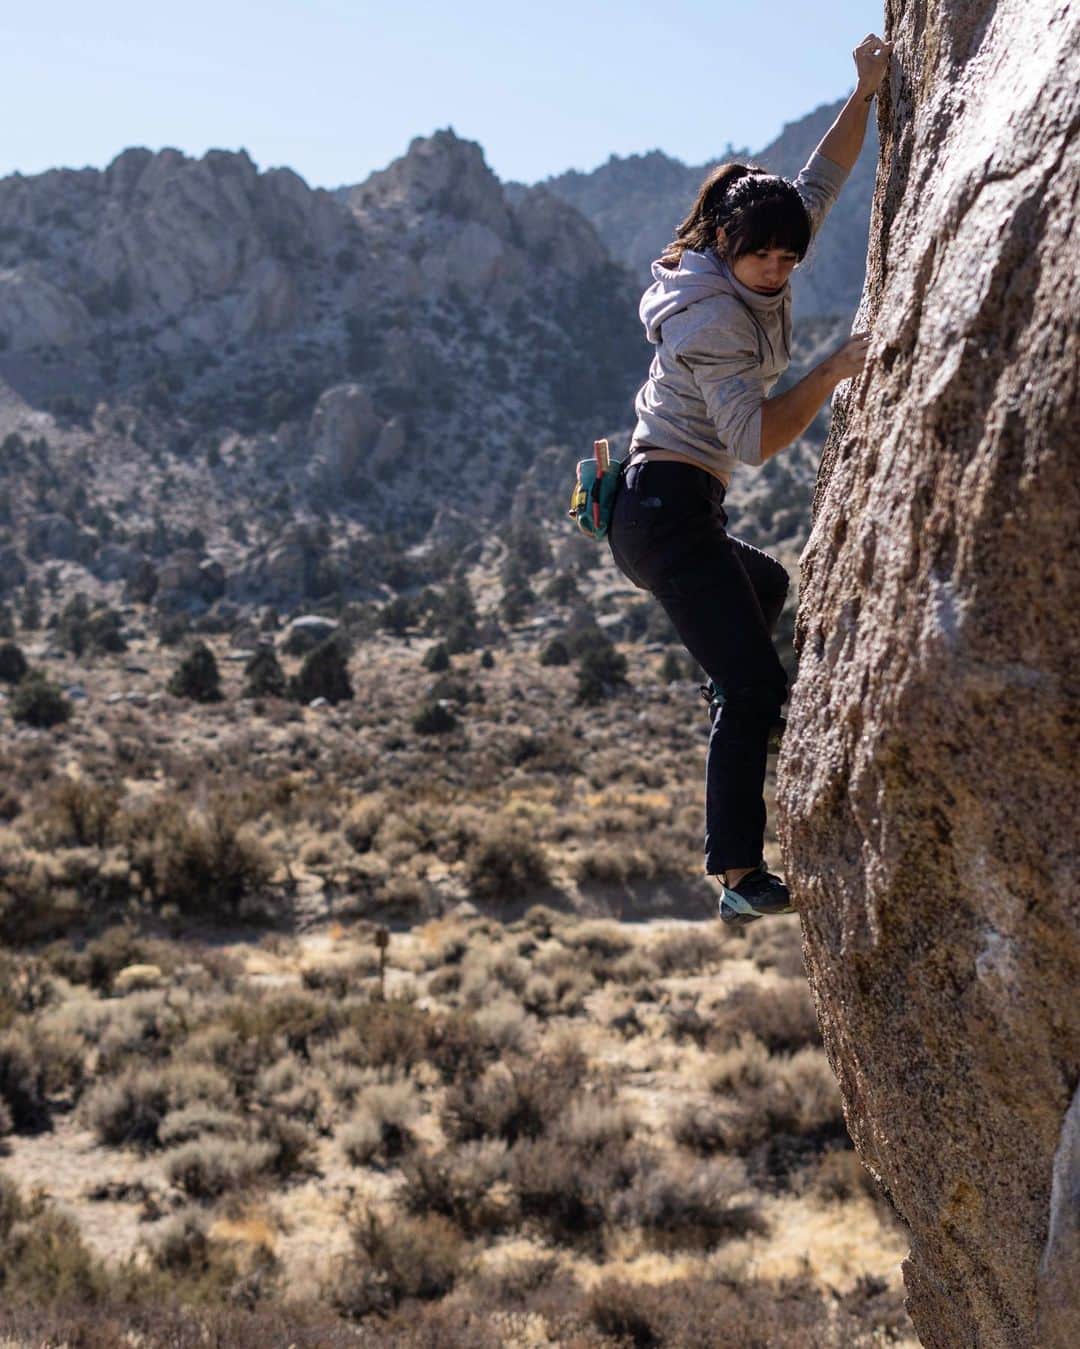 ニーナ・ウィリアムズのインスタグラム：「As you might have guessed, we’re in Bishop right now. I recognize the privilege of climbing in this community, as well as the risks, which is why @james_lucas and I self-isolated for the first two weeks (before Thanksgiving) and are renting a house into 2021. The current stay-at-home order (effective December 5th) shuts down campgrounds and many indoor services but encourages local, outdoor recreation with immediate household members. . Earlier last week, a pair of masked climbers approached our group at the Druids. They asked if we minded if they climbed with us, and we said - yes, we do mind 😐 Not rudely, but not warmly either. The climbers stood there for a bit, asked us for suggestions of where else to go, and eventually walked off. It was a slightly awkward but overall respectful and productive encounter. . I’m writing this to acknowledge our current location, as well as offer a sincere ⭐️thank you⭐️ to those climbers. Social etiquette is difficult to navigate and the climbing community is just as affected by poor communication as any other group environment. Conflict is inevitable 💥 Bad behavior is worth calling out, but I hope that also highlighting good behavior encourages others to follow in similar fashion. . Many climbers are socially distancing, wearing masks, and asking permission to climb. It’s pretty rad. Big thanks to those who, for the most part, are setting positive examples and managing these awkward moments with grace 🙏🏻 I’m particularly grateful to @bishopclimbers and @bishopclimbingrangers for the daily work you do. . People have long memories - what do you want to be remembered for? 😷💛 . @thenorthface @thenorthface_climb @scarpana @organicclimbing @gnarlynutrition #climbing #bouldering #payahuunadü #bishopclimbing #buttermilks」